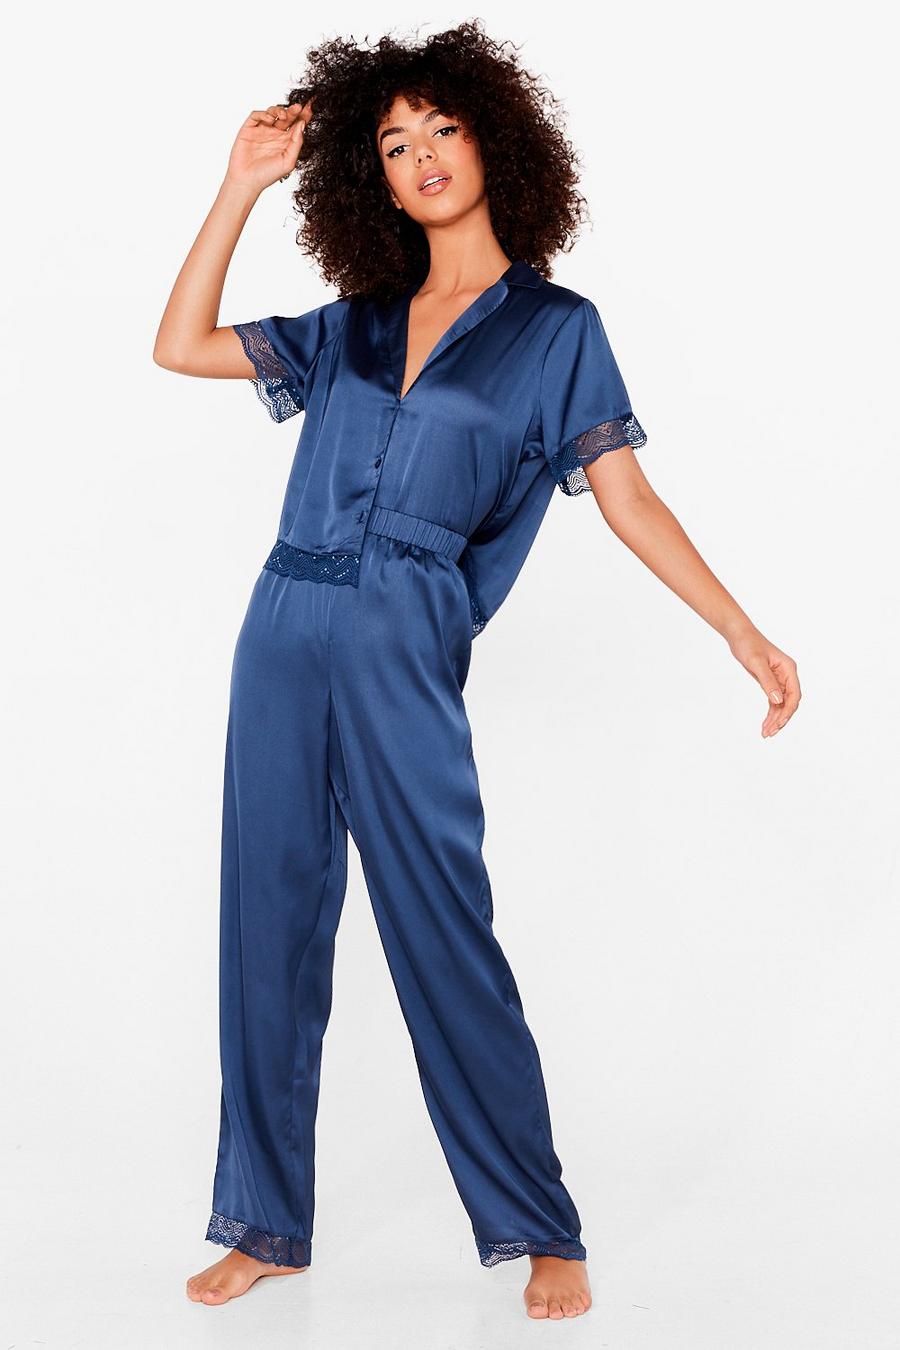 Invest in Rest Satin Lace Pants Pajama Set